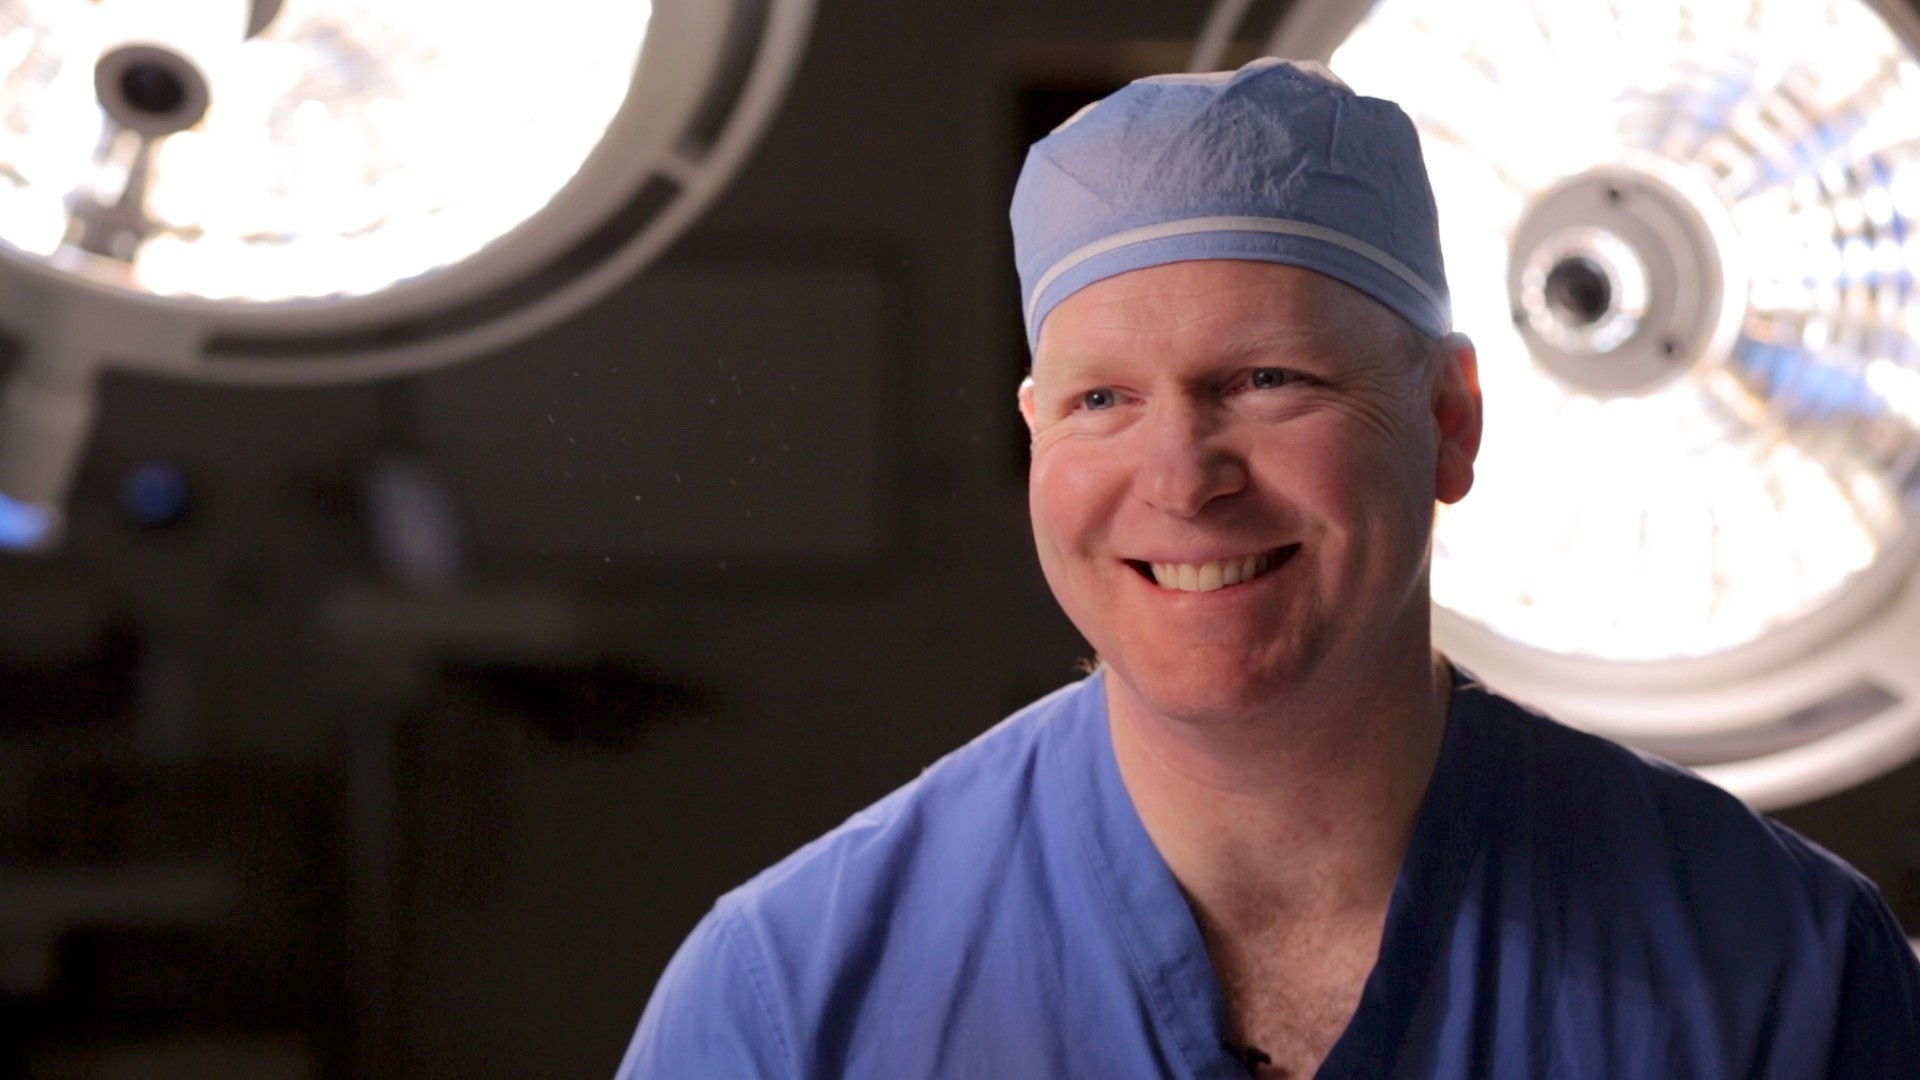 Jeffrey R. Carlson, M.D. is the first orthopaedic surgeon to train on the M6-C artificial disc.